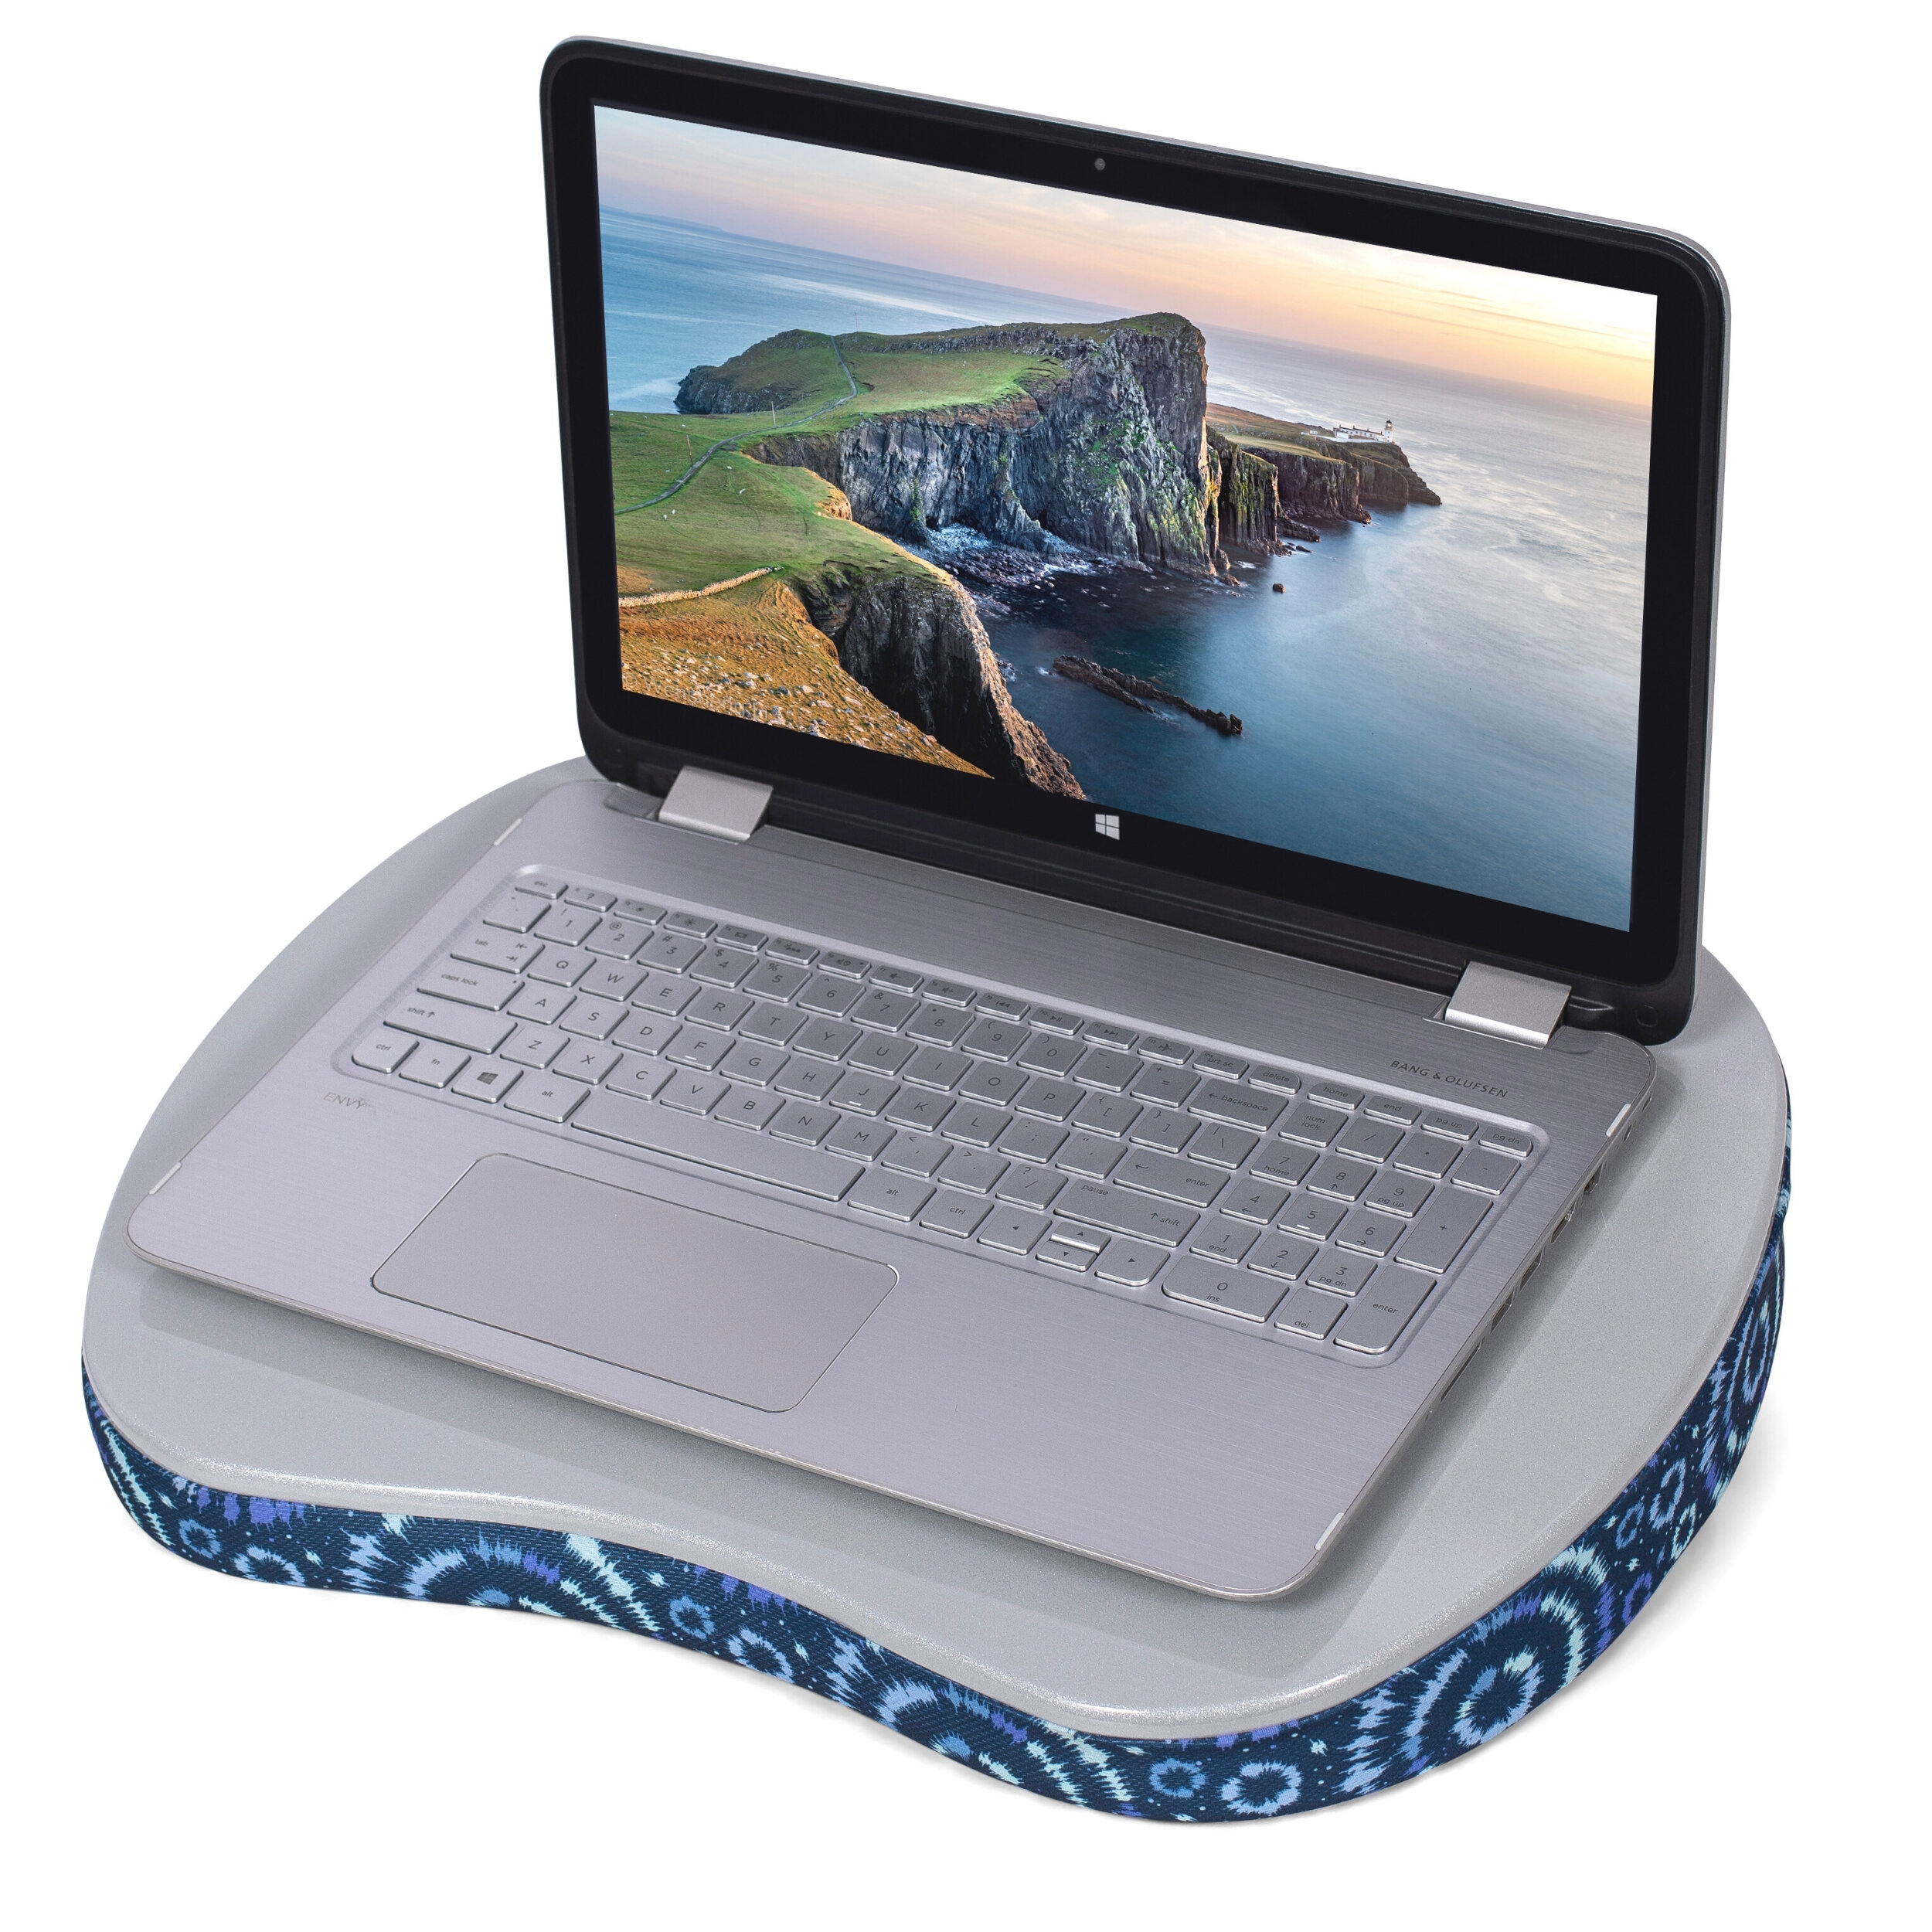 PORTABLE LAP DESK LAPTOP TRAY WITH PILLOW CUSHION MOUSE PAD PHONE TABLET  SLOT